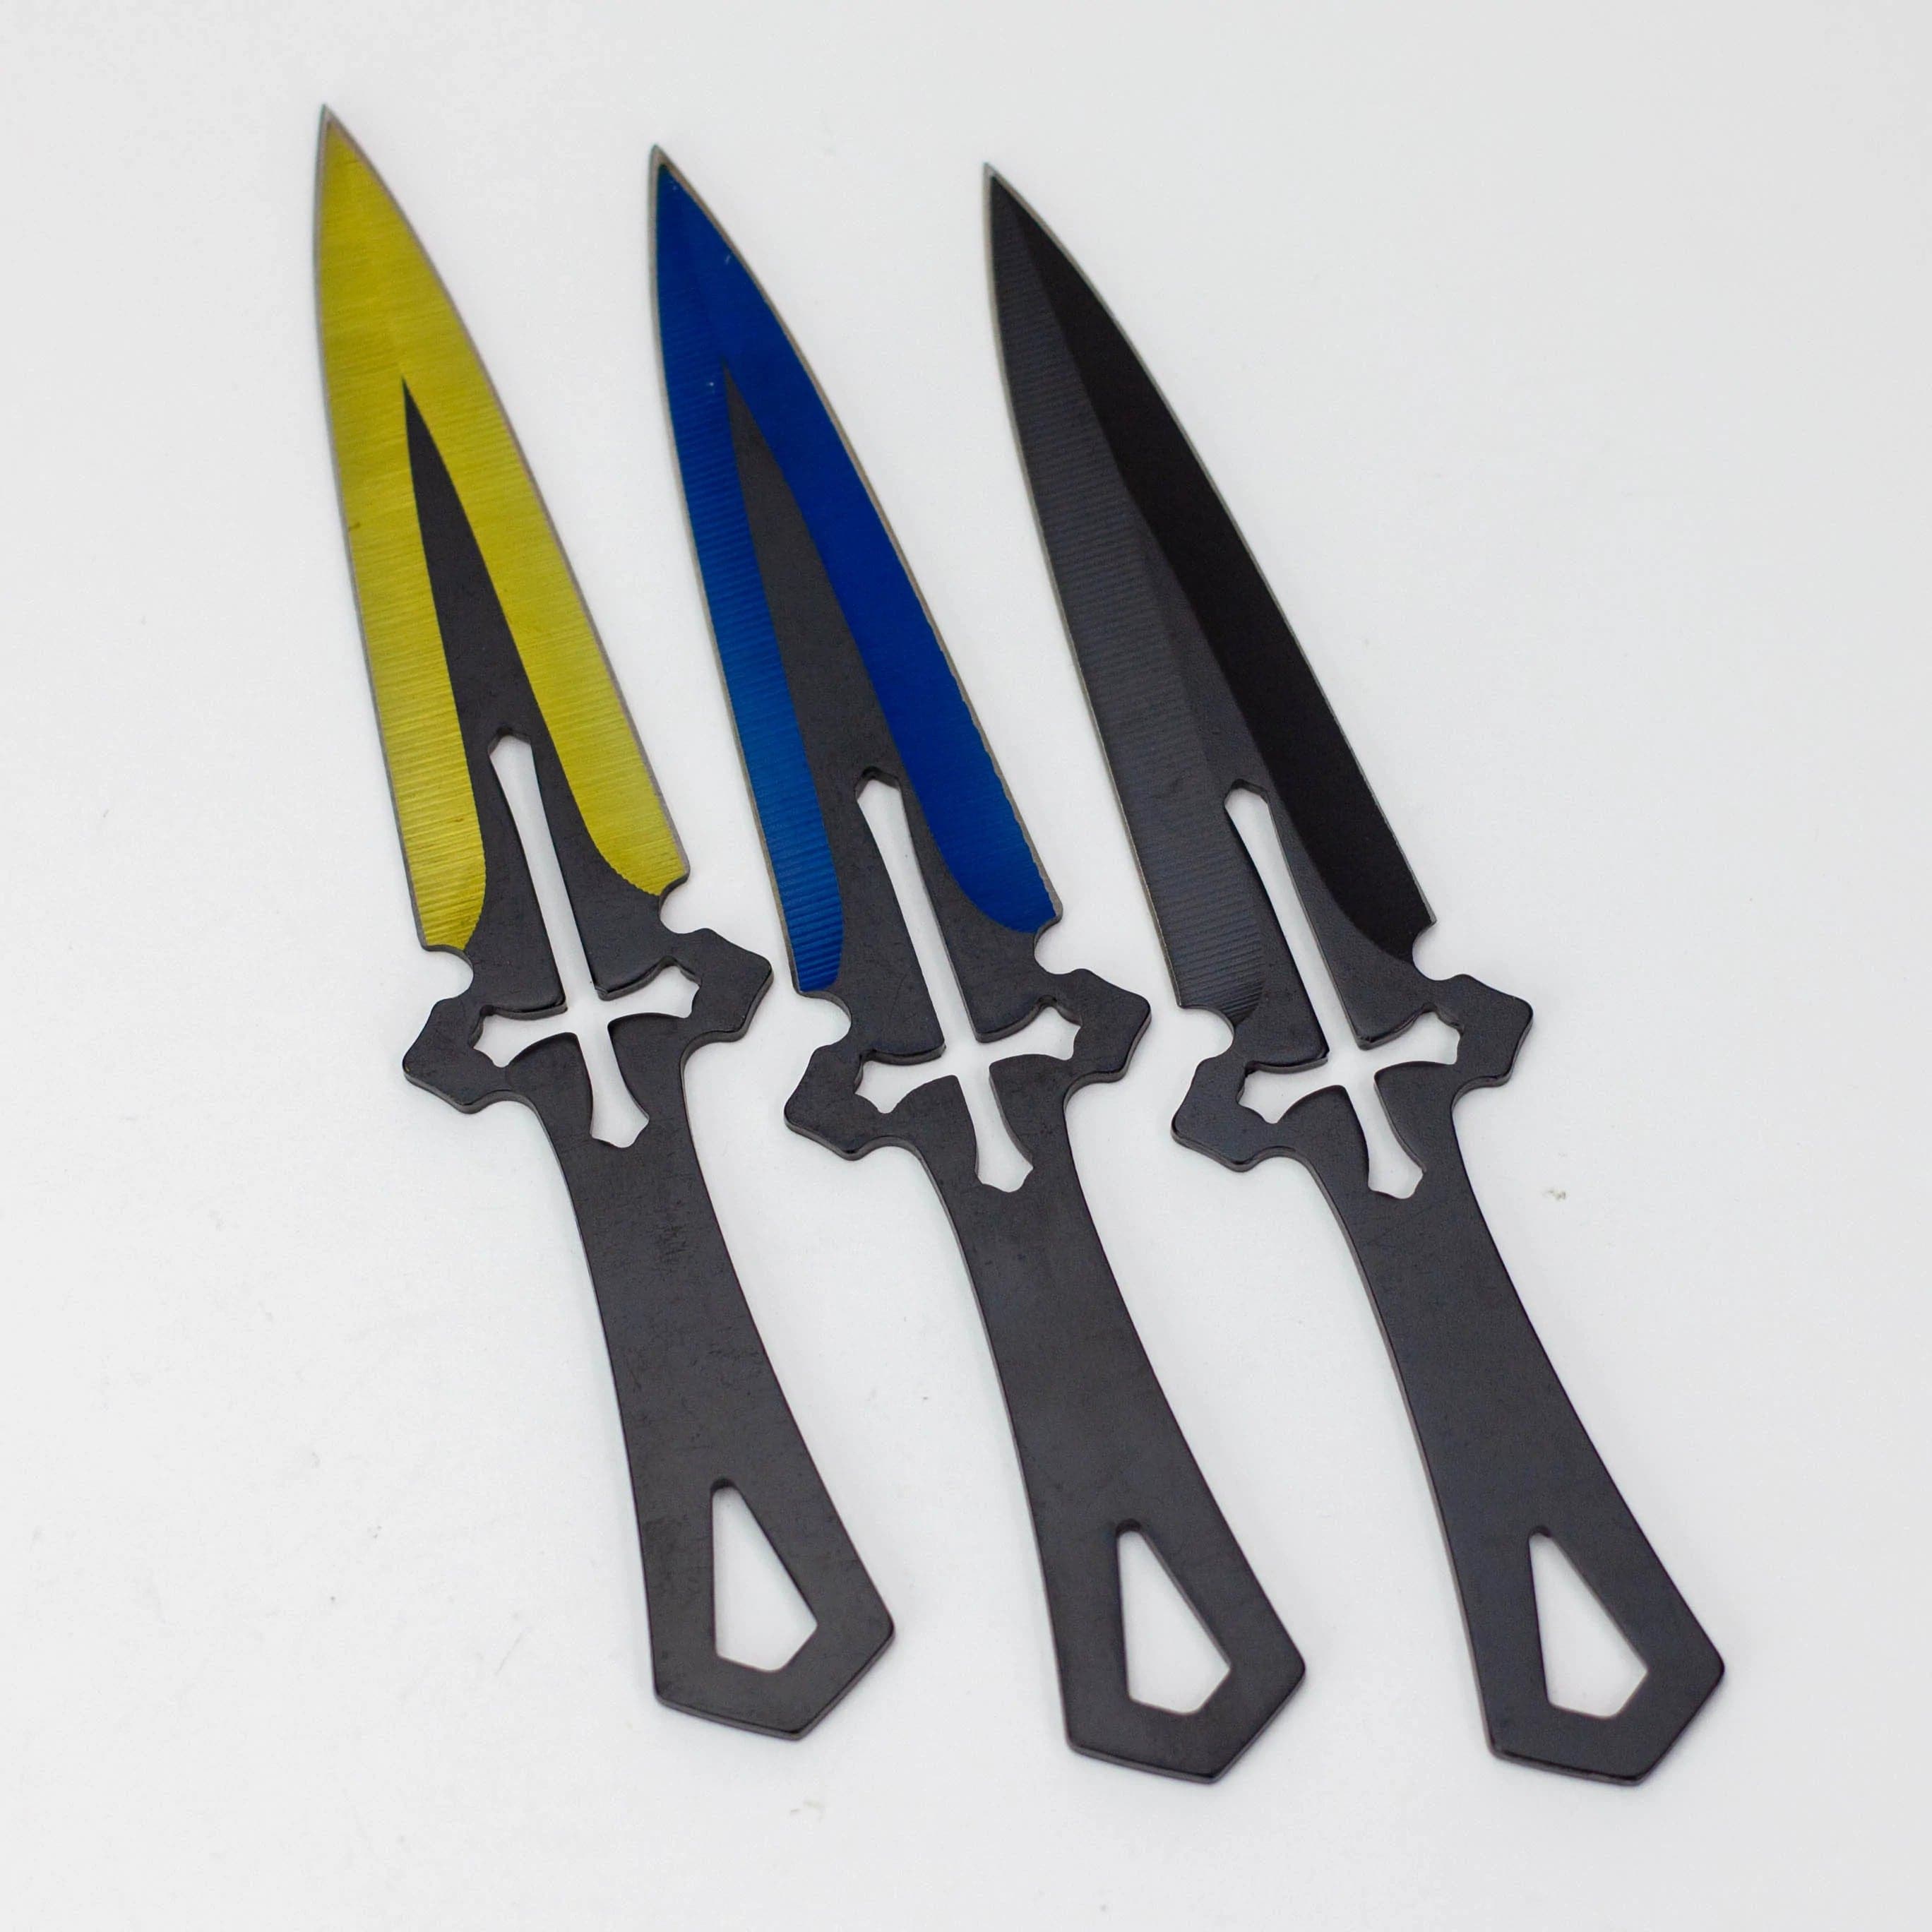 6.5″ Throwing Knife with Sheath 3PC SET Blue/Gold/Black_2